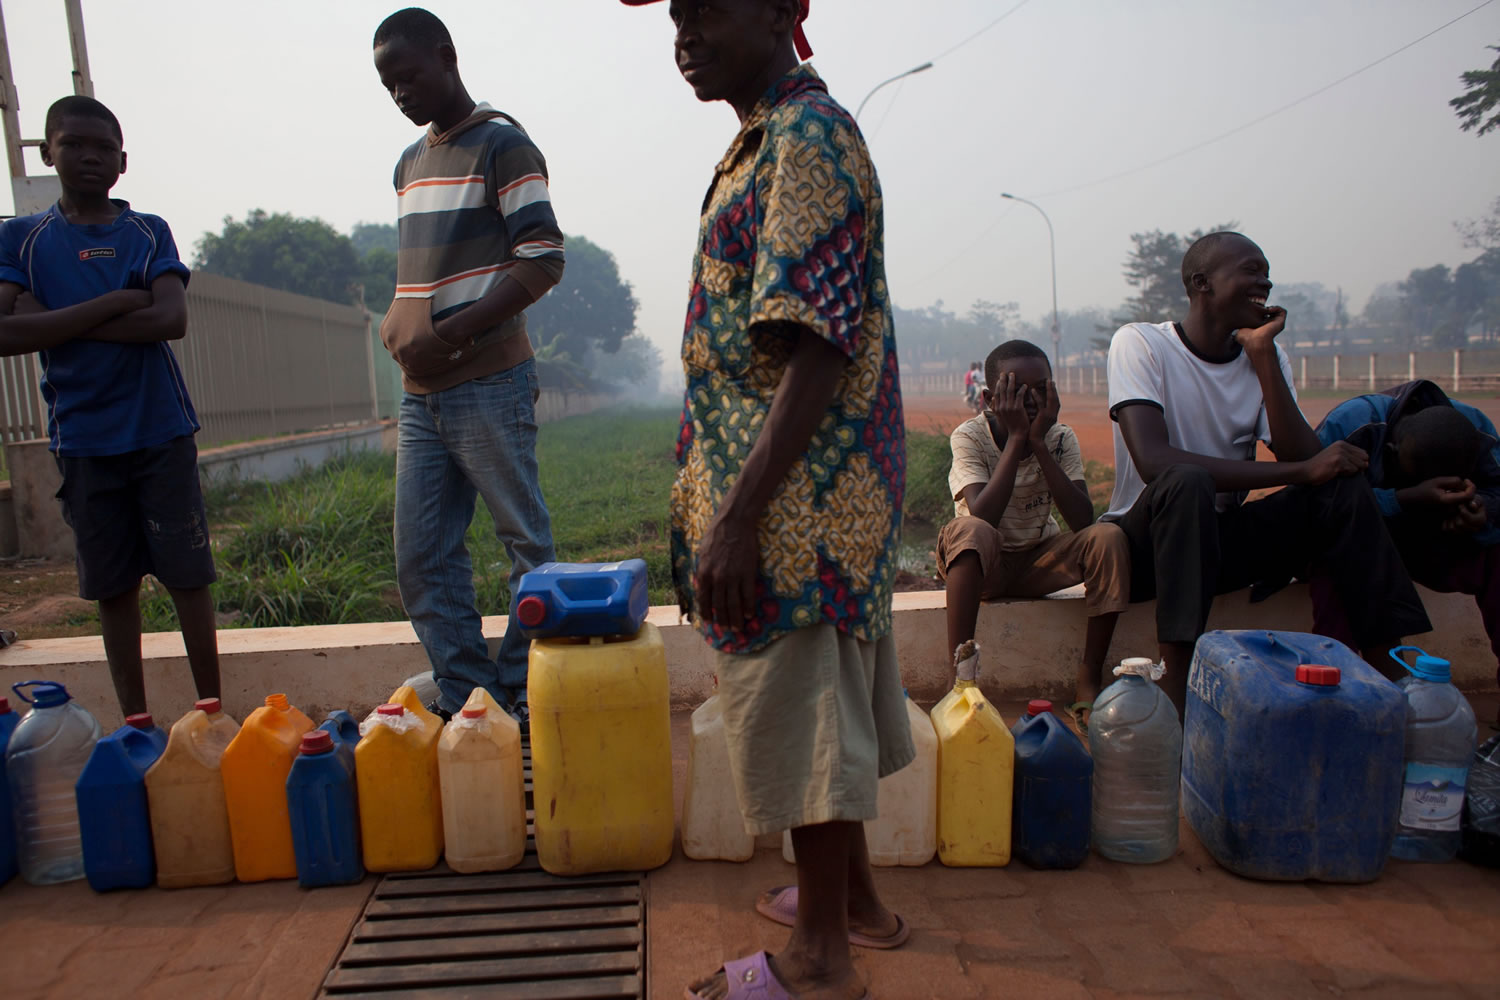 People waiting to purchase fuel hold their places in line with jerrycans at a gas station that was closed, as they await the arrival of military police, in Bangui, Central African Republic, on Tuesday.